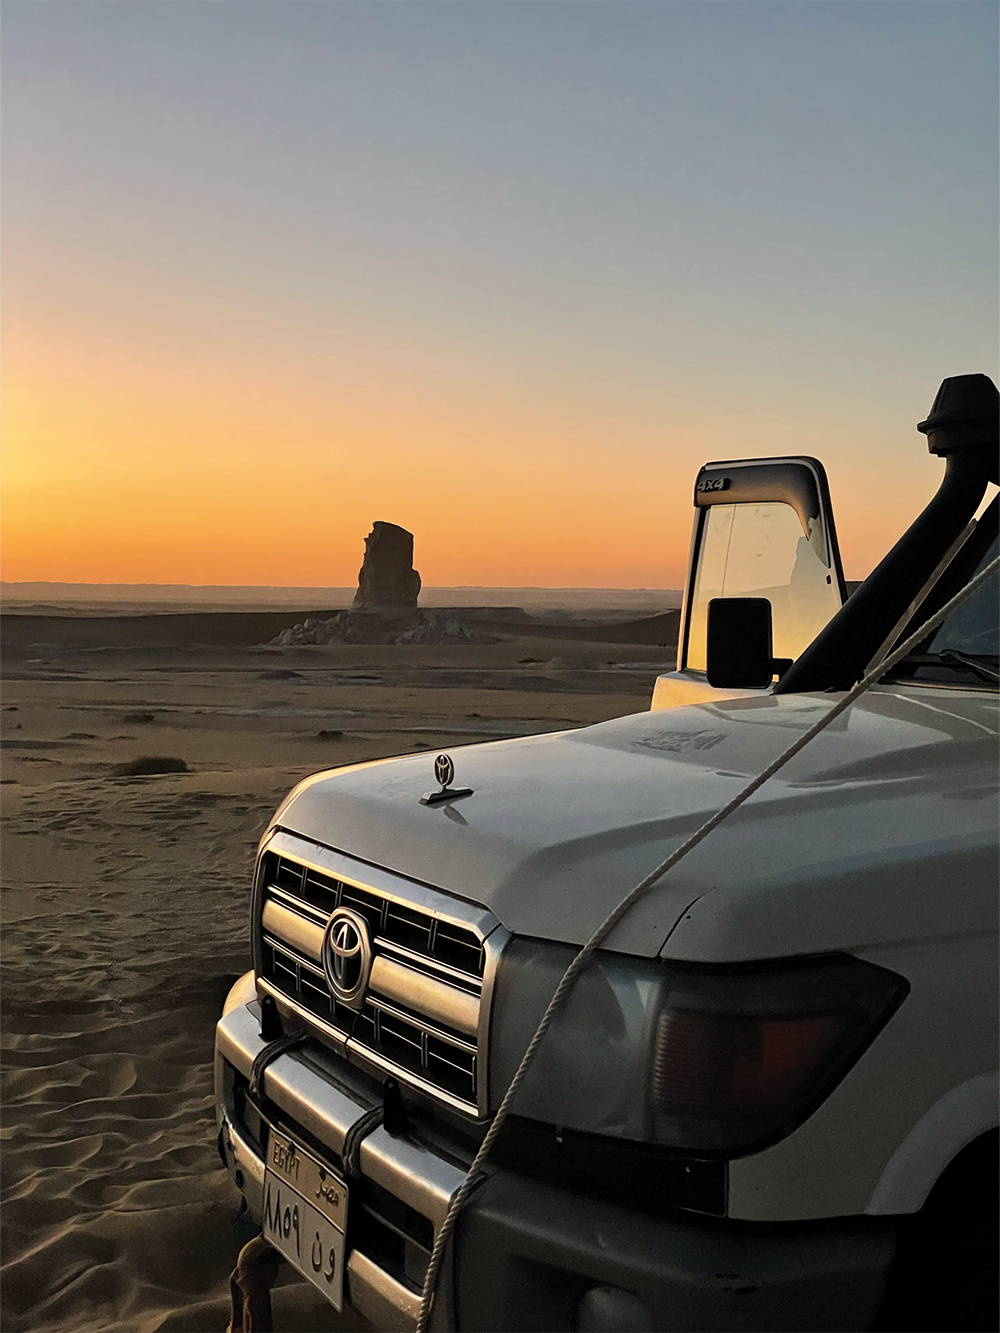 Sunset on the Egyptian Sahara with off-road vehicle in front.